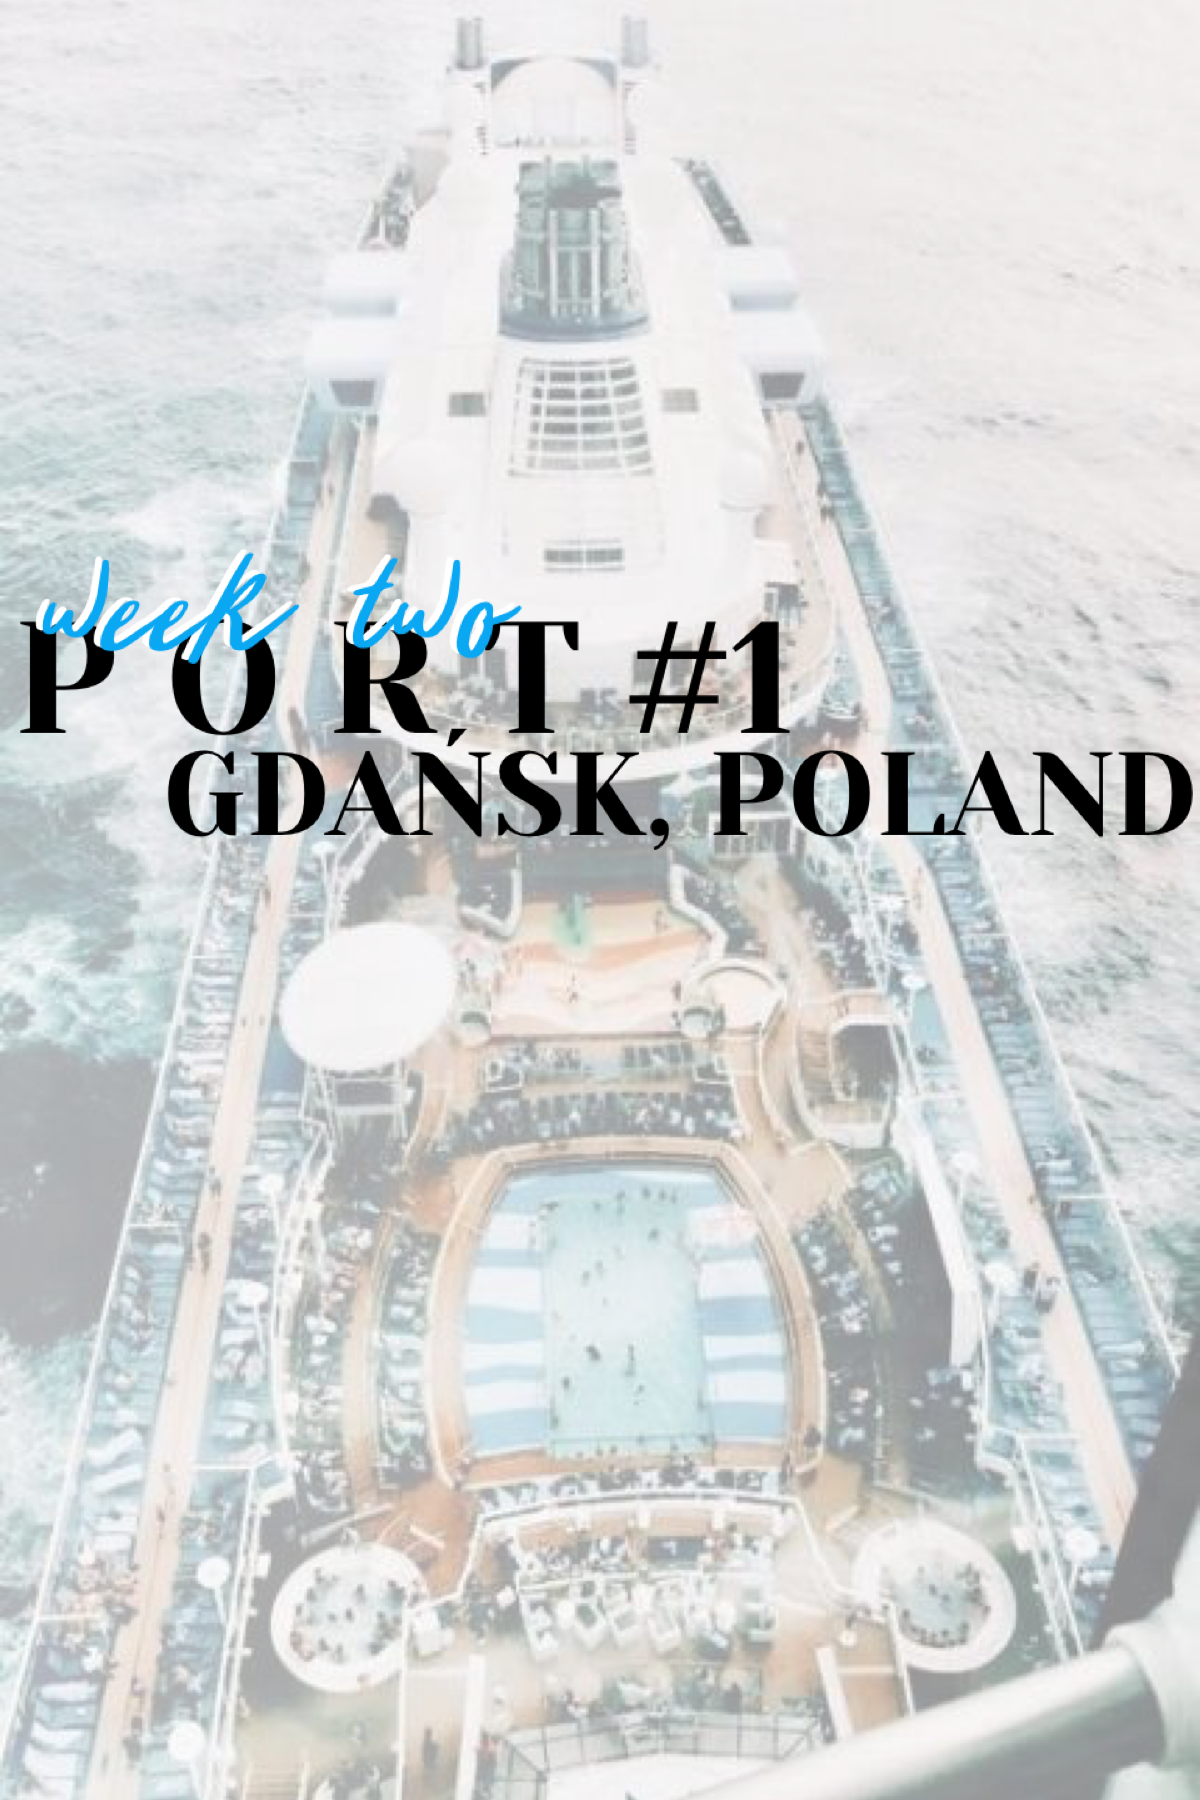 first port in gdańsk, poland! make sure you take pictures for sea buzz📸 